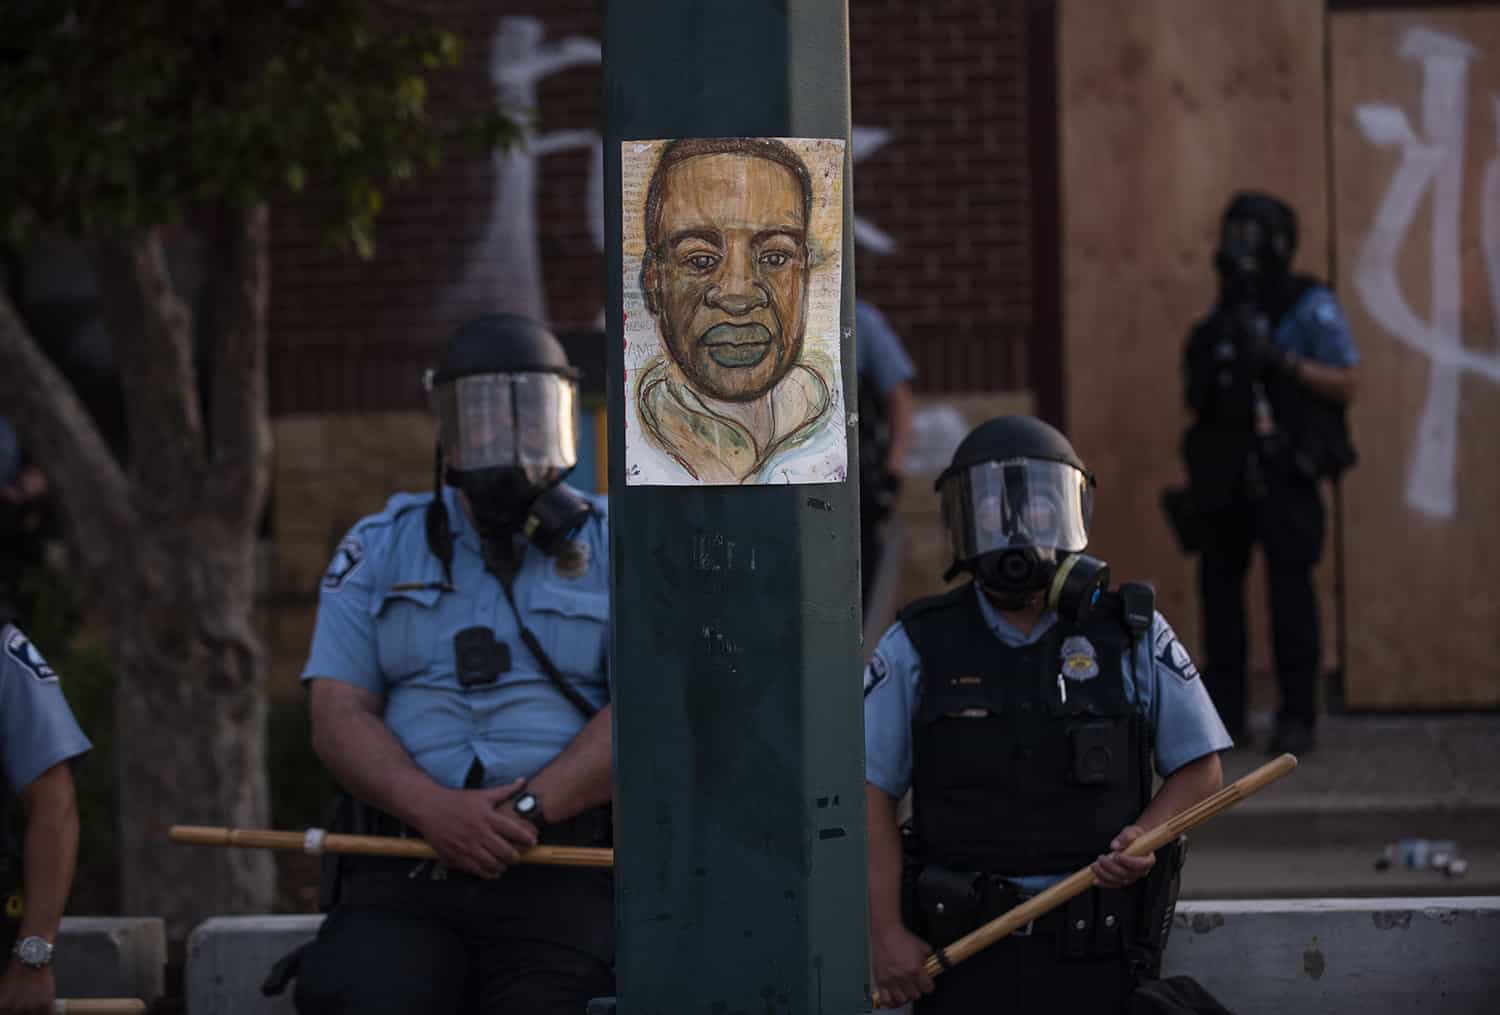 A portrait of George Floyd hangs on a street light pole as police officers stand guard.